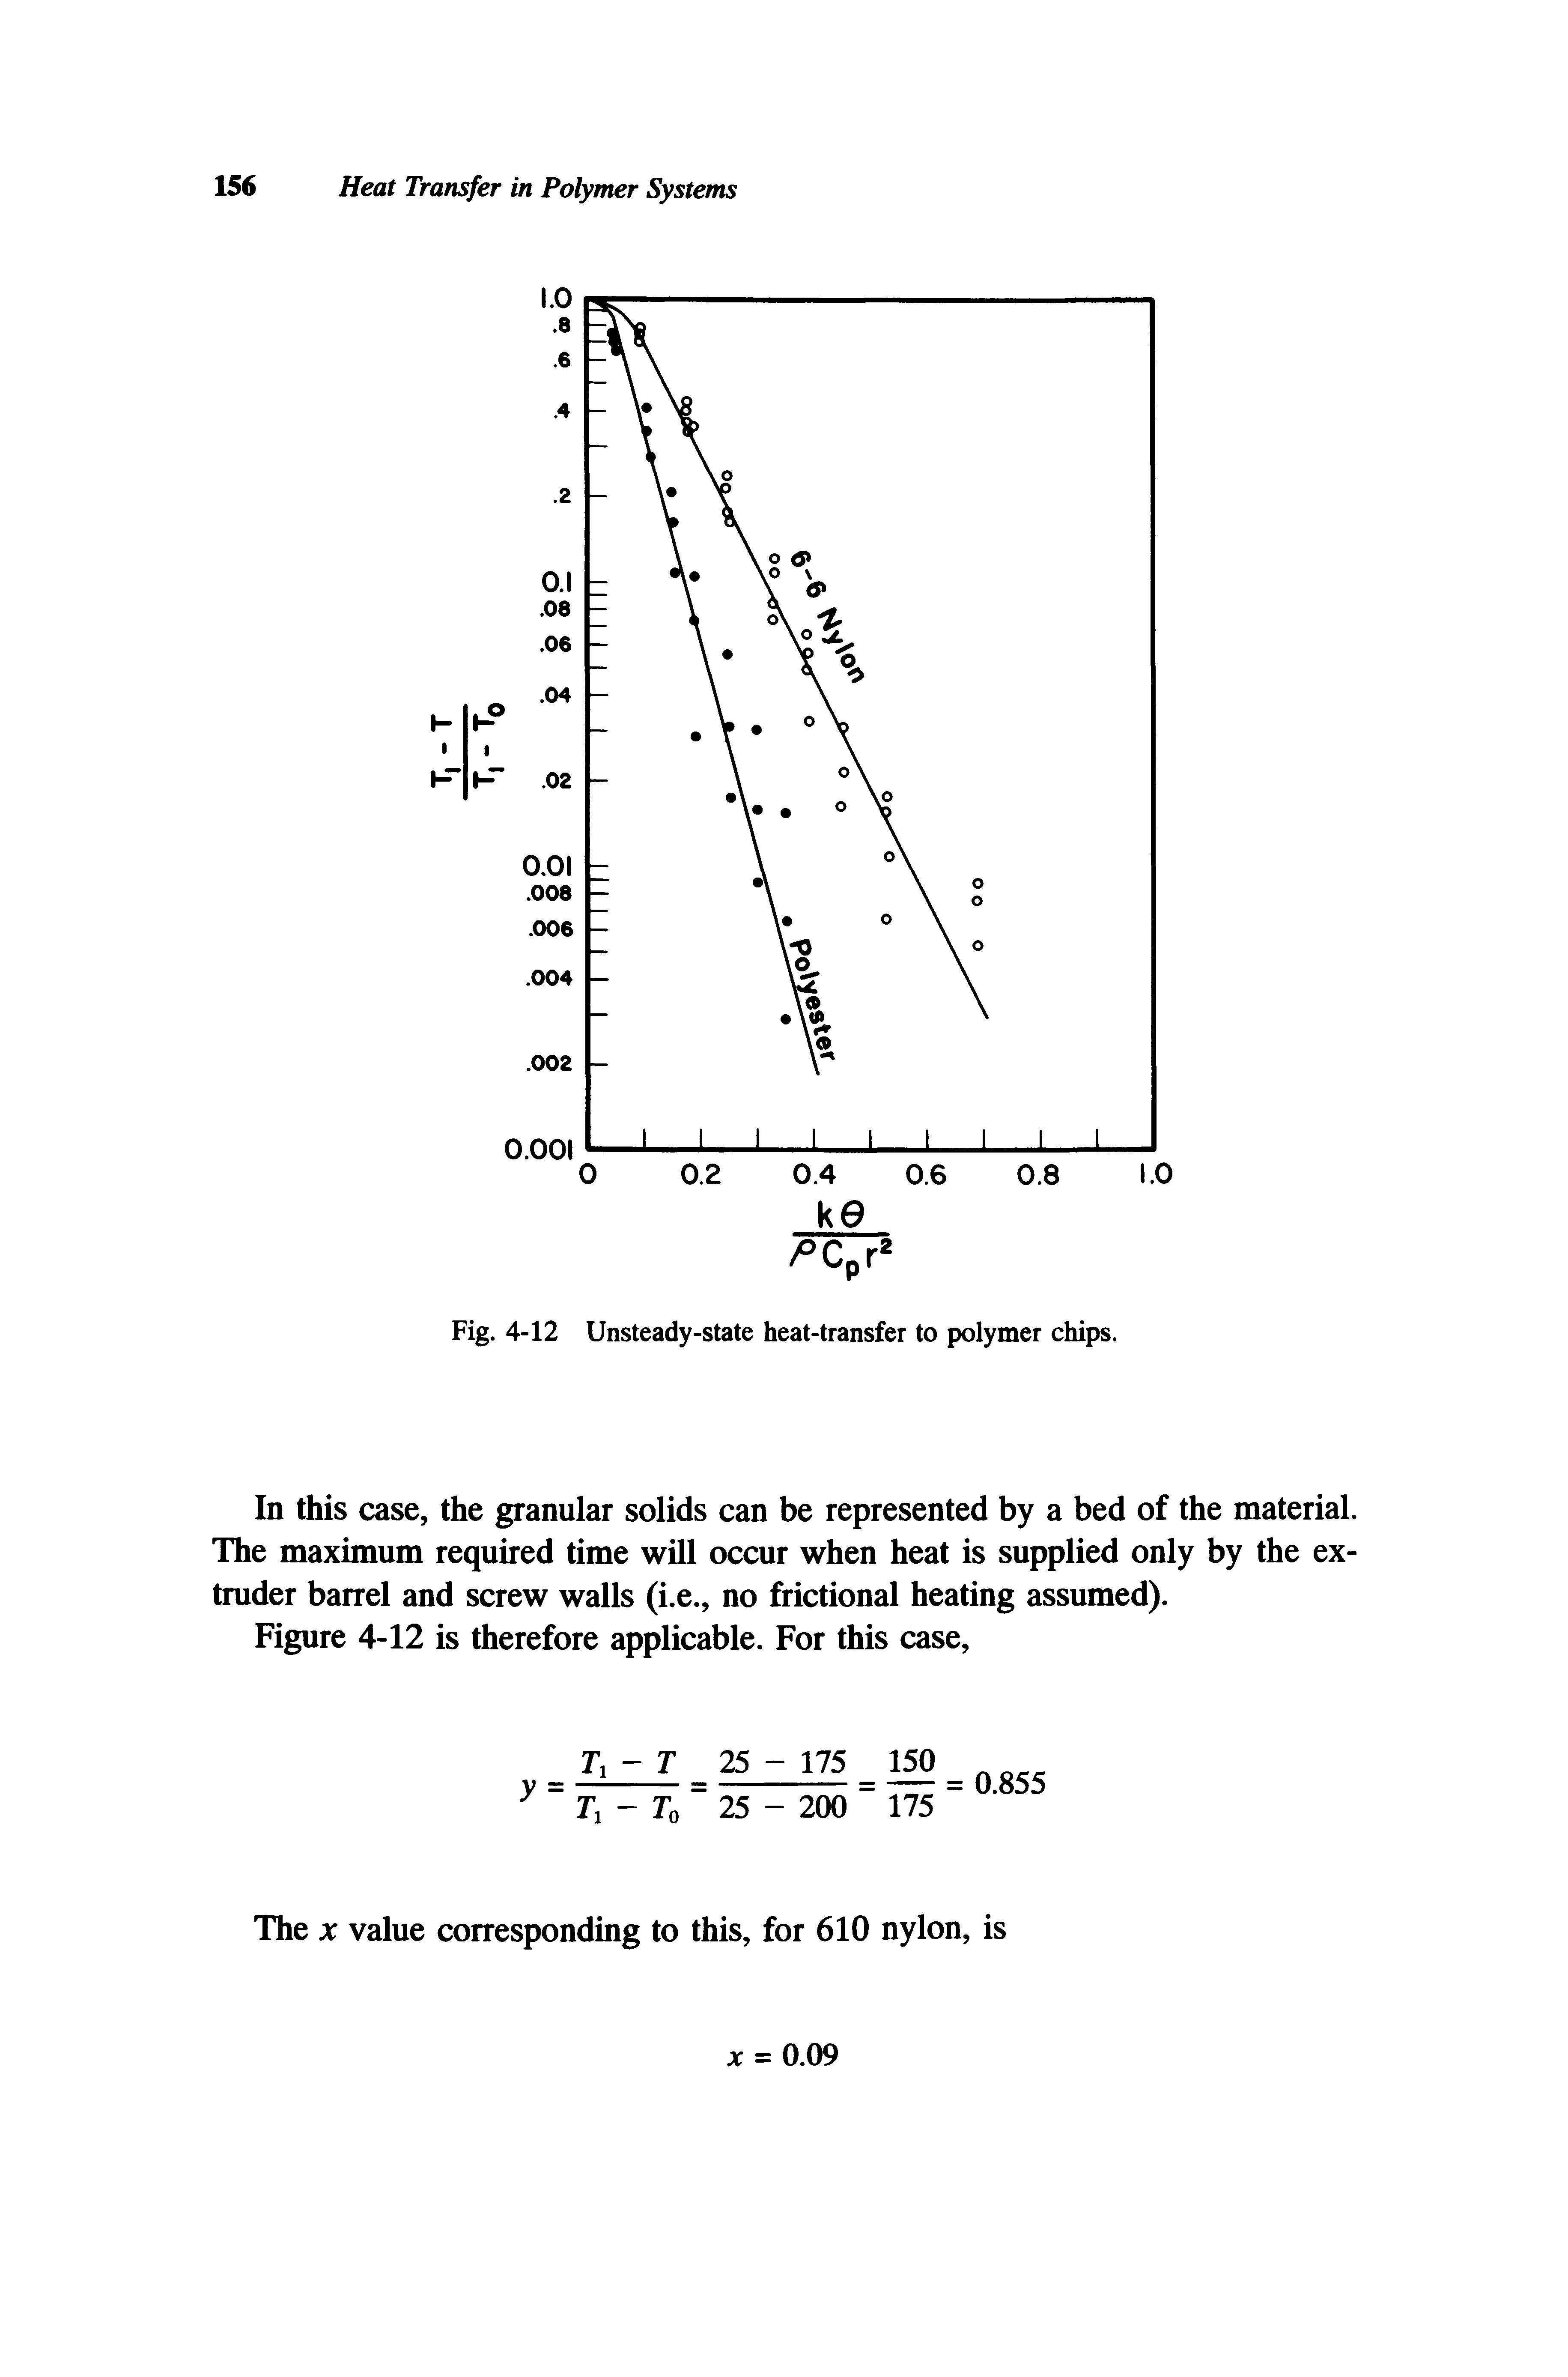 Fig. 4-12 Unsteady-state heat-transfer to polymer chips.